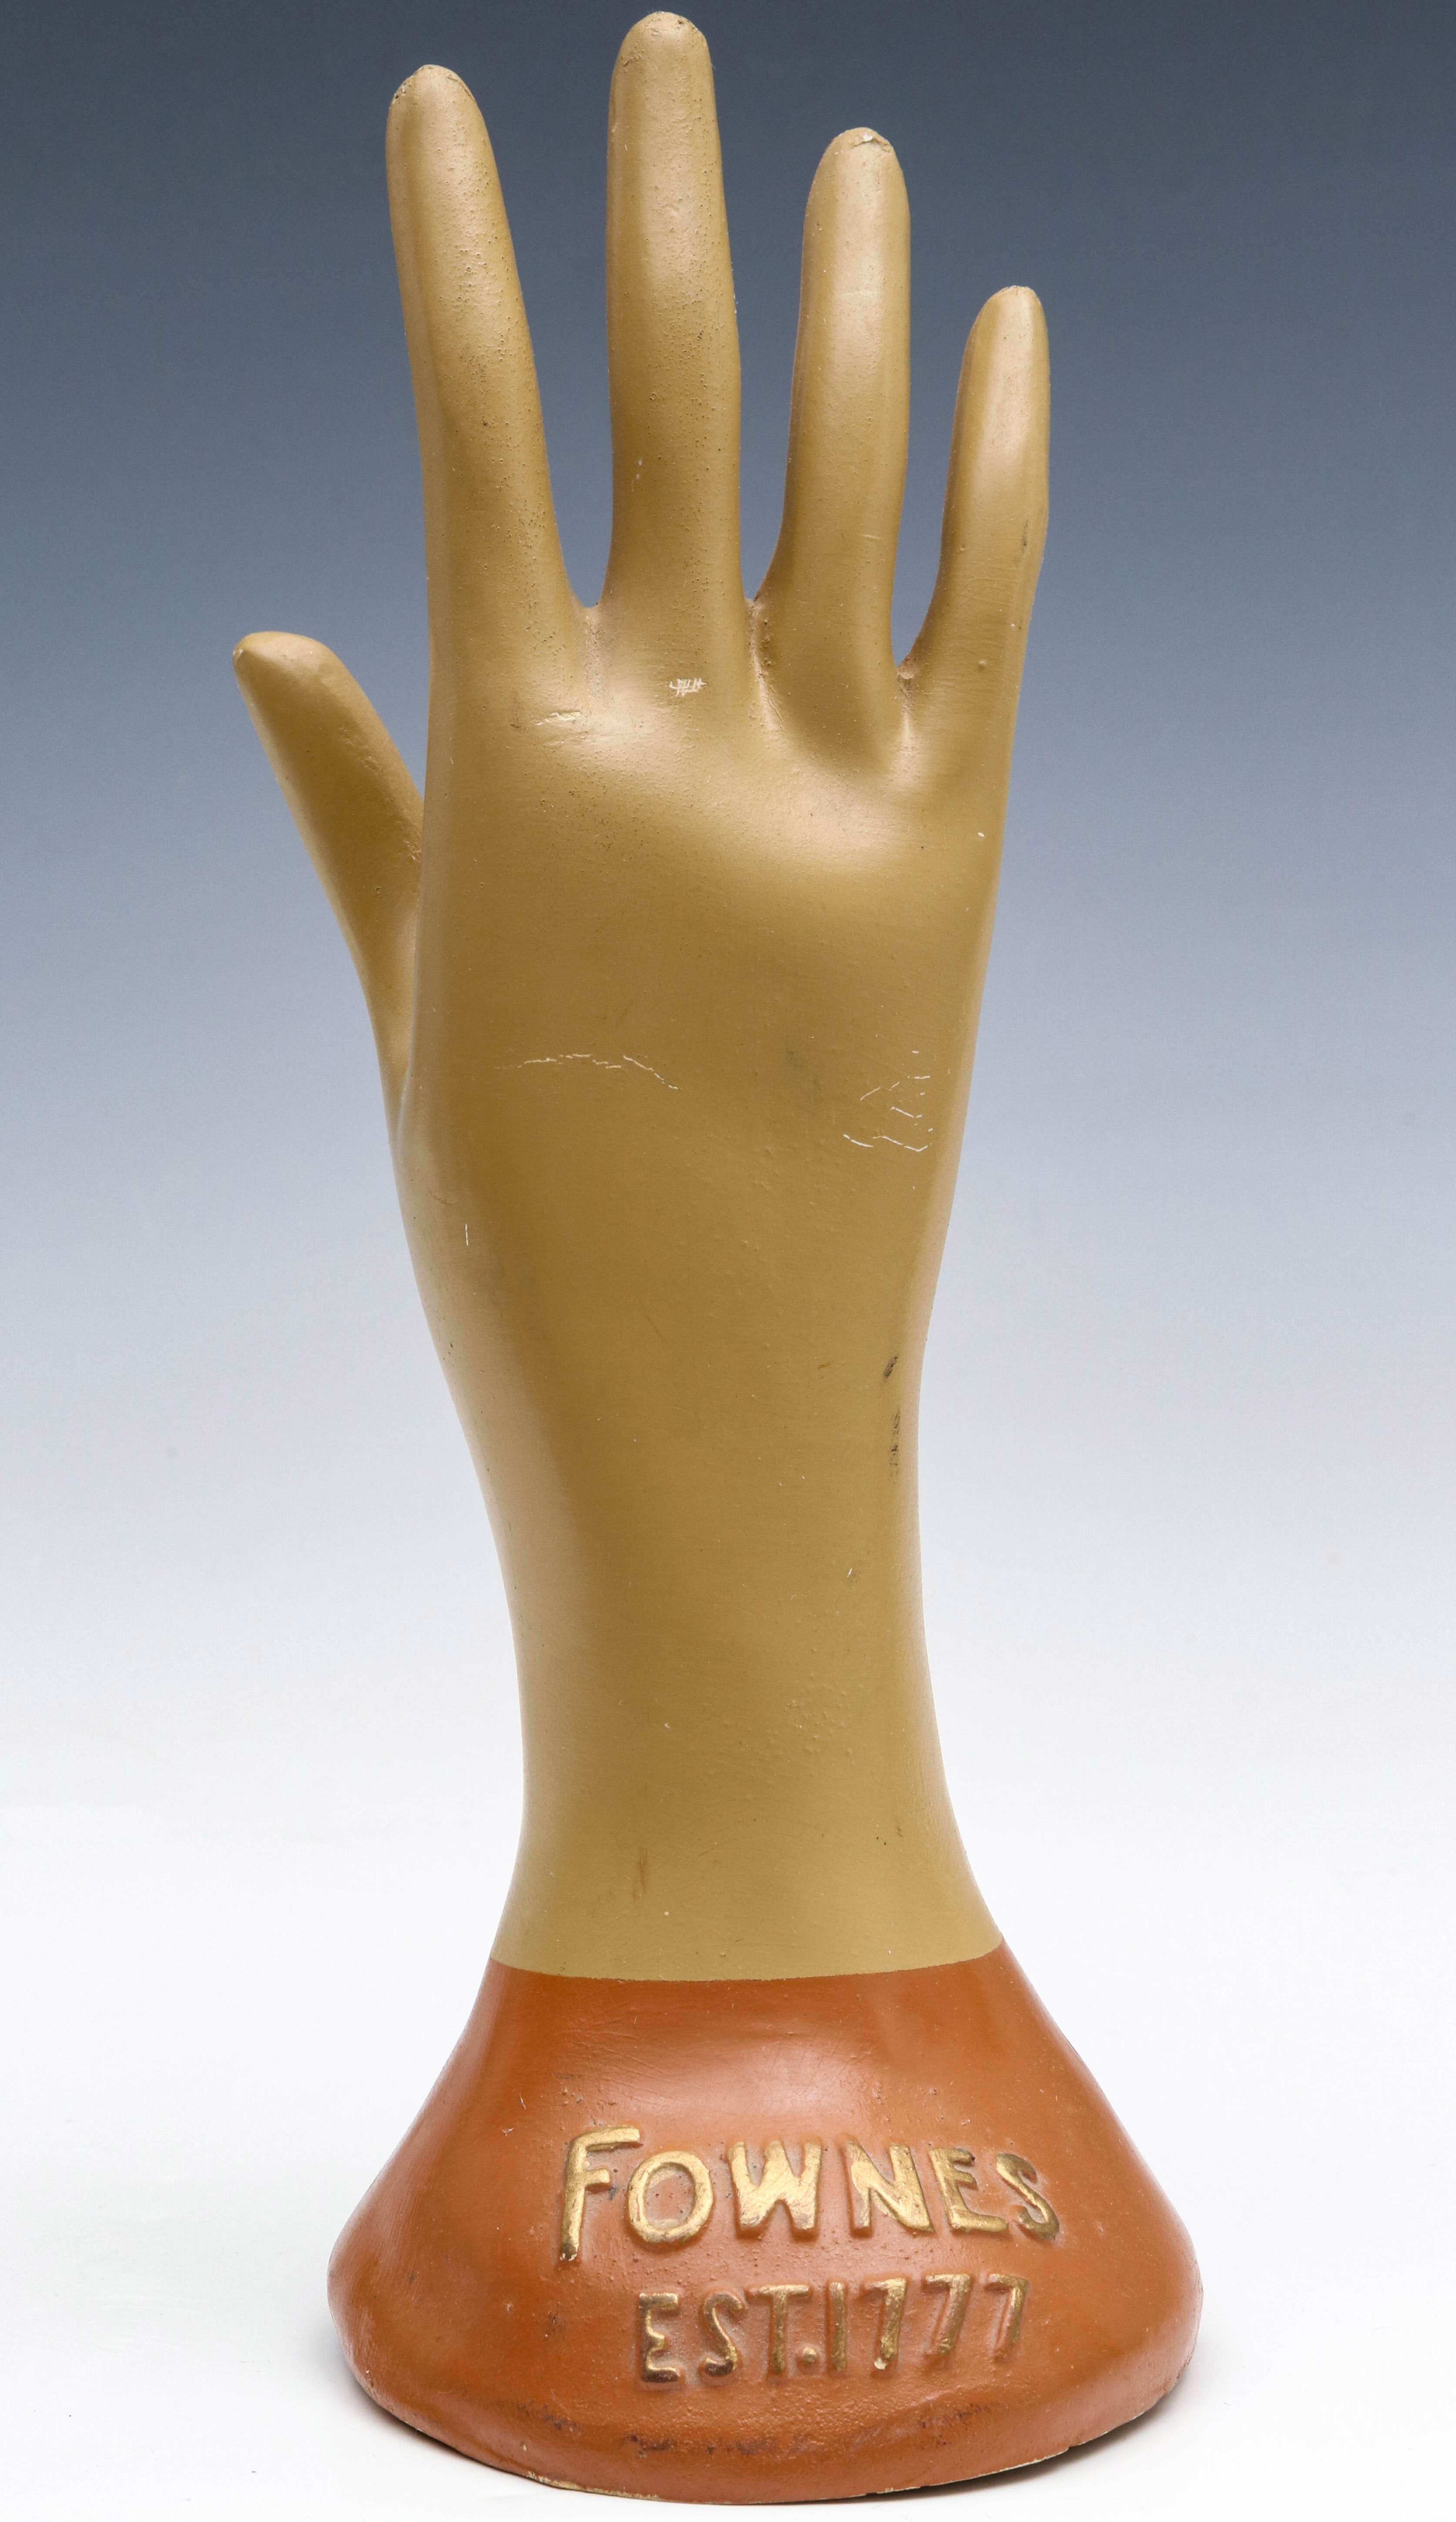 A COMPOSITION HAND MANNEQUIN FOR FOWNES GLOVES